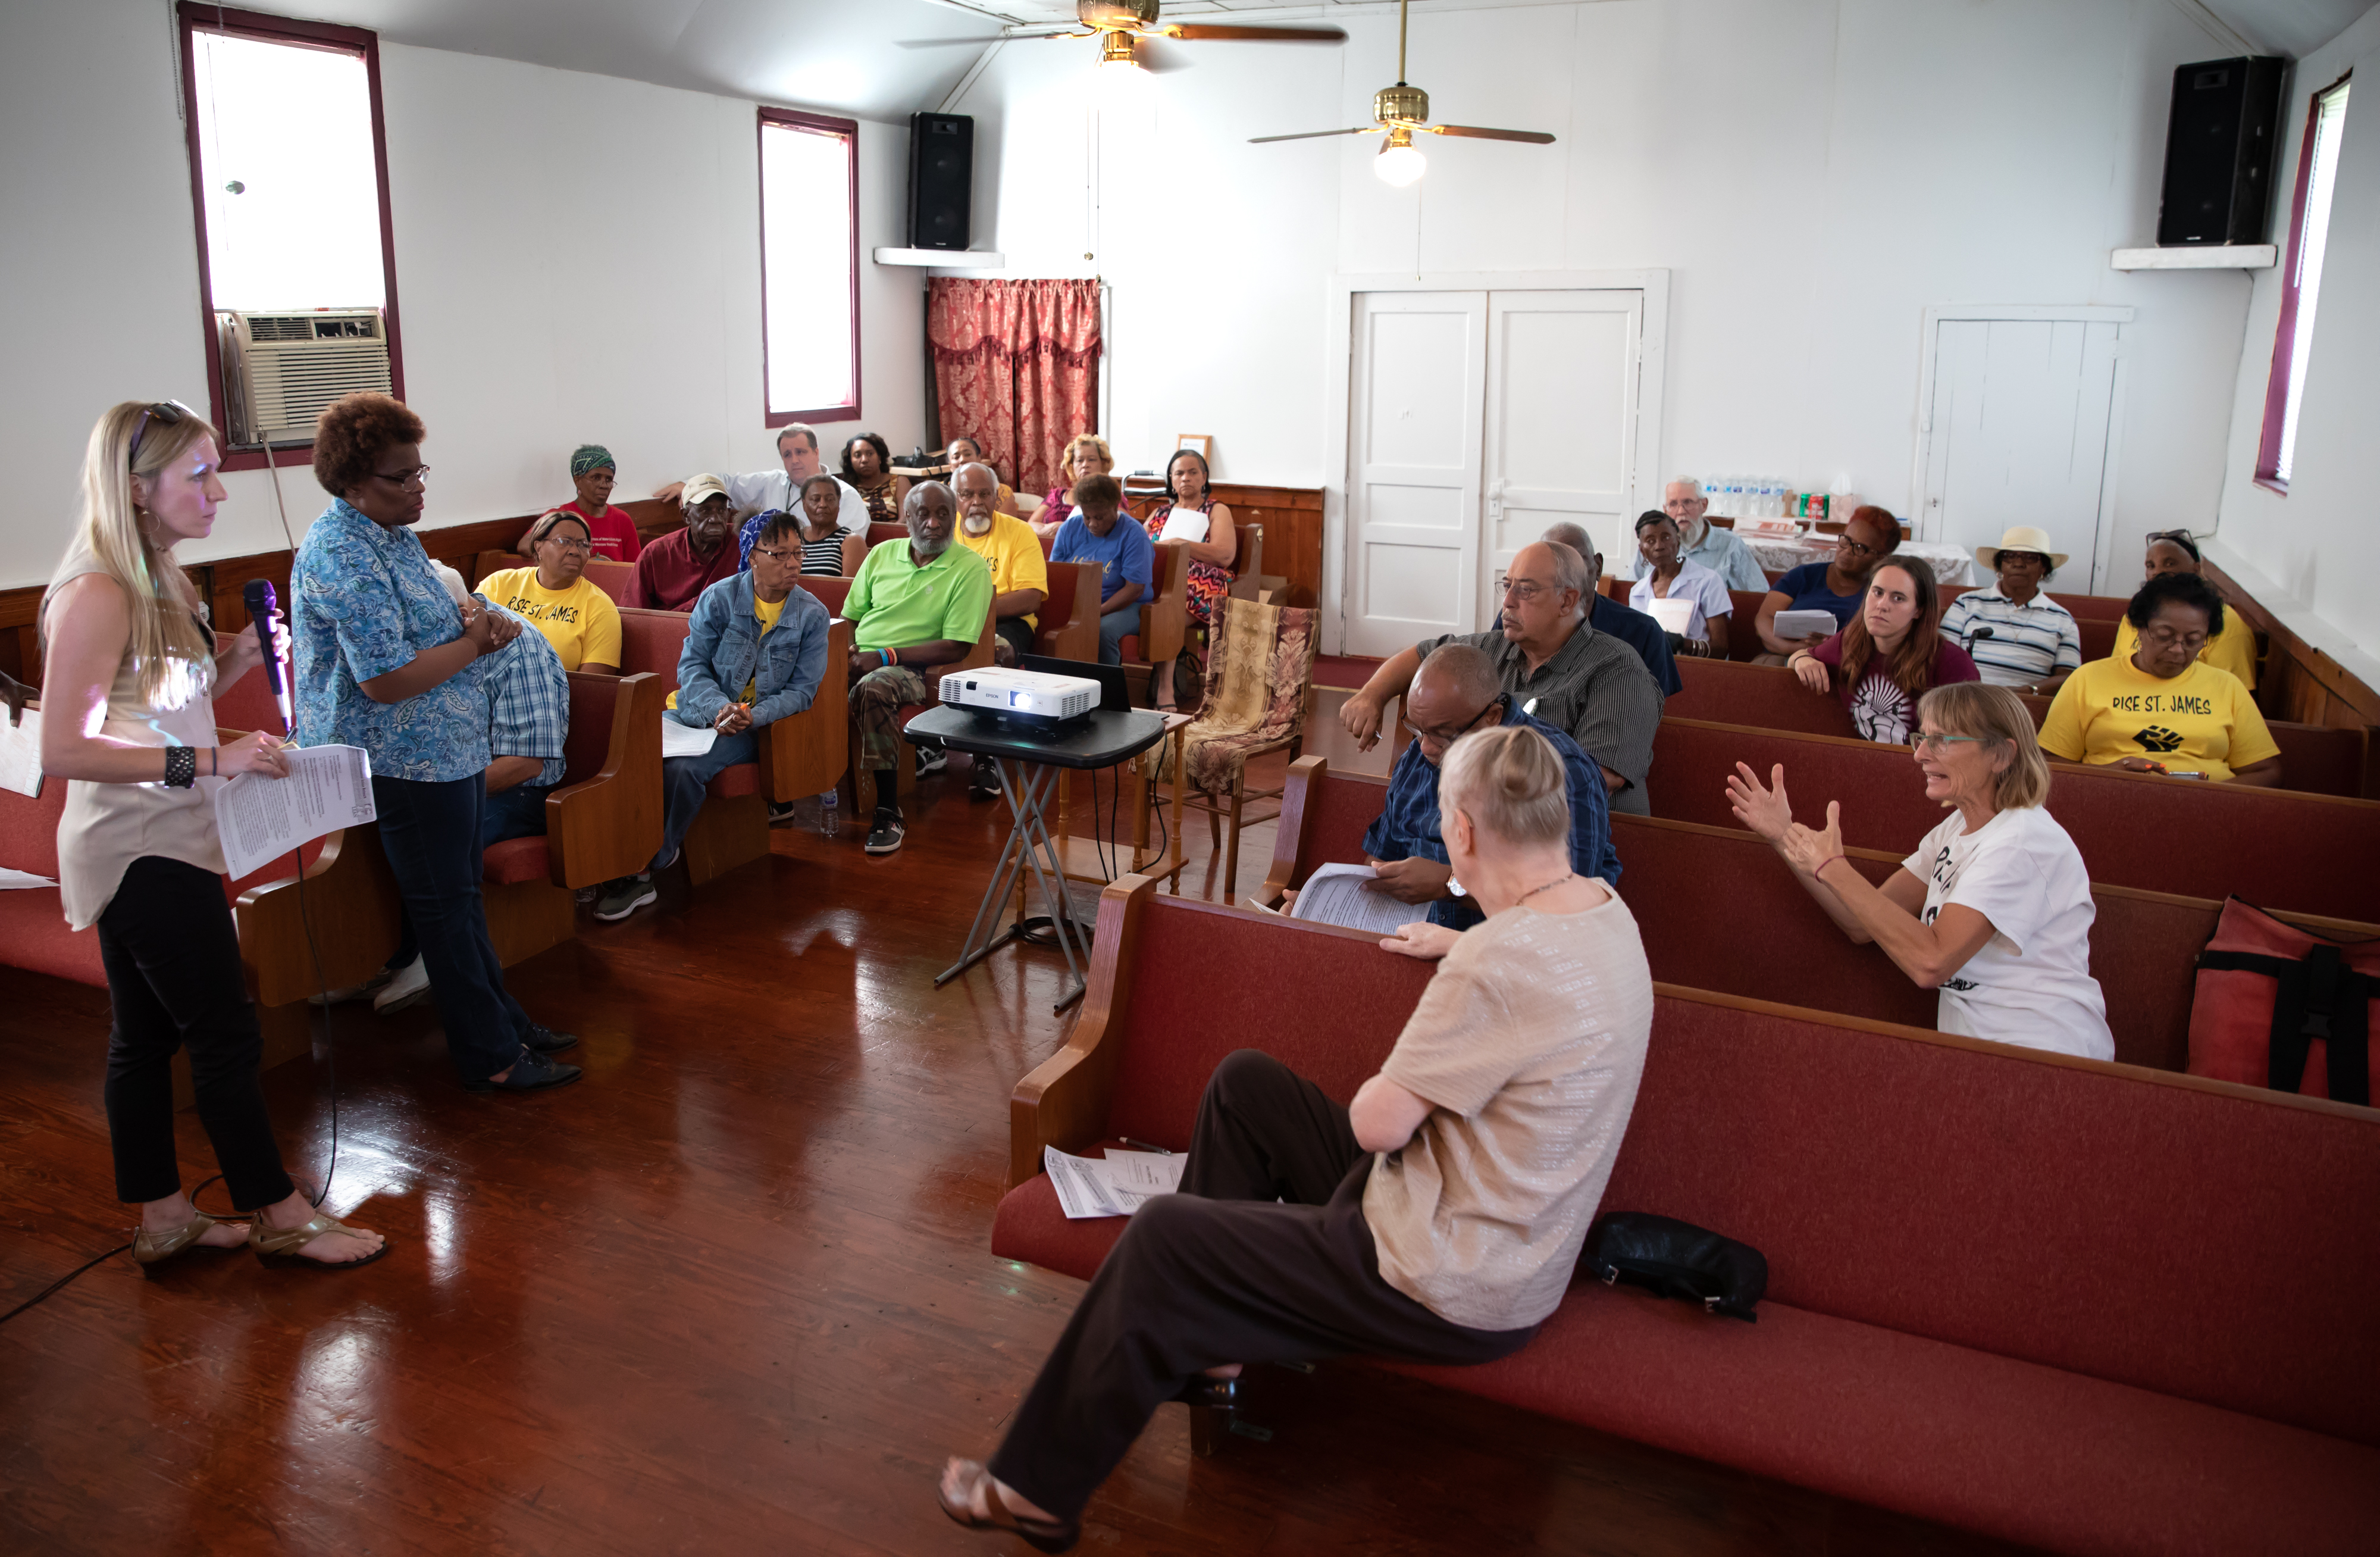 Campaigners gather to discuss Mosaic in Louisiana's 'Cancer Alley' - Photographer Julie Dermansky